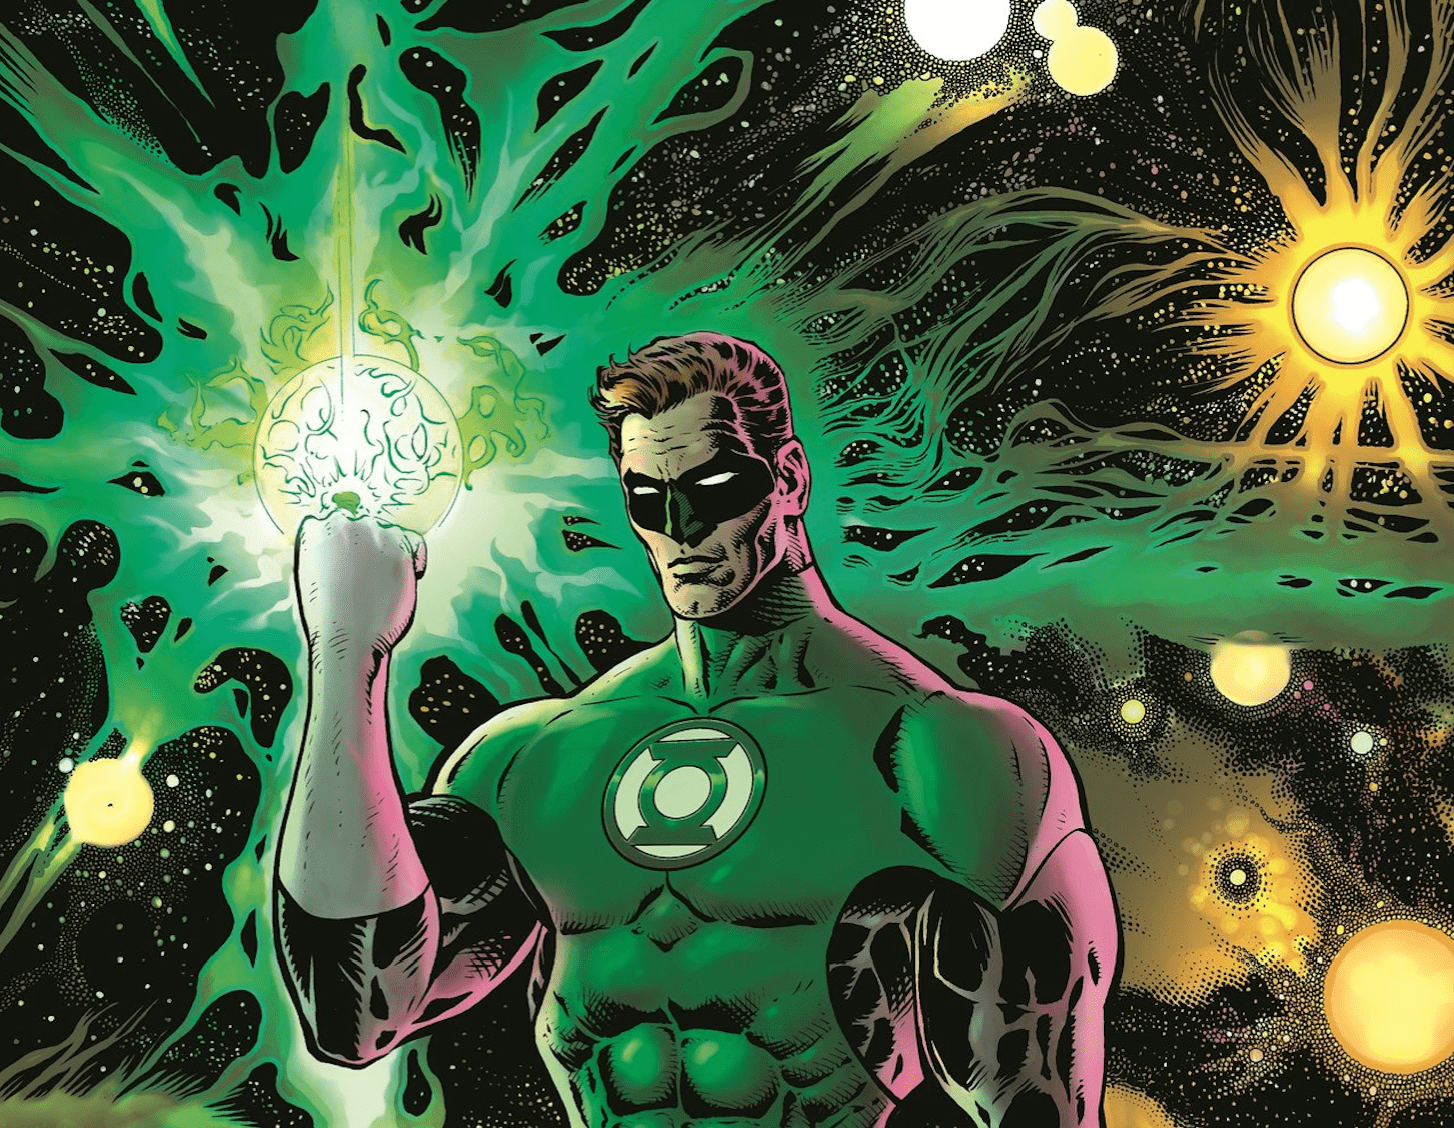 DC to relaunch The Green Lantern by Grant Morrison and Liam Sharp with a focus on Hal Jordan as a space cop